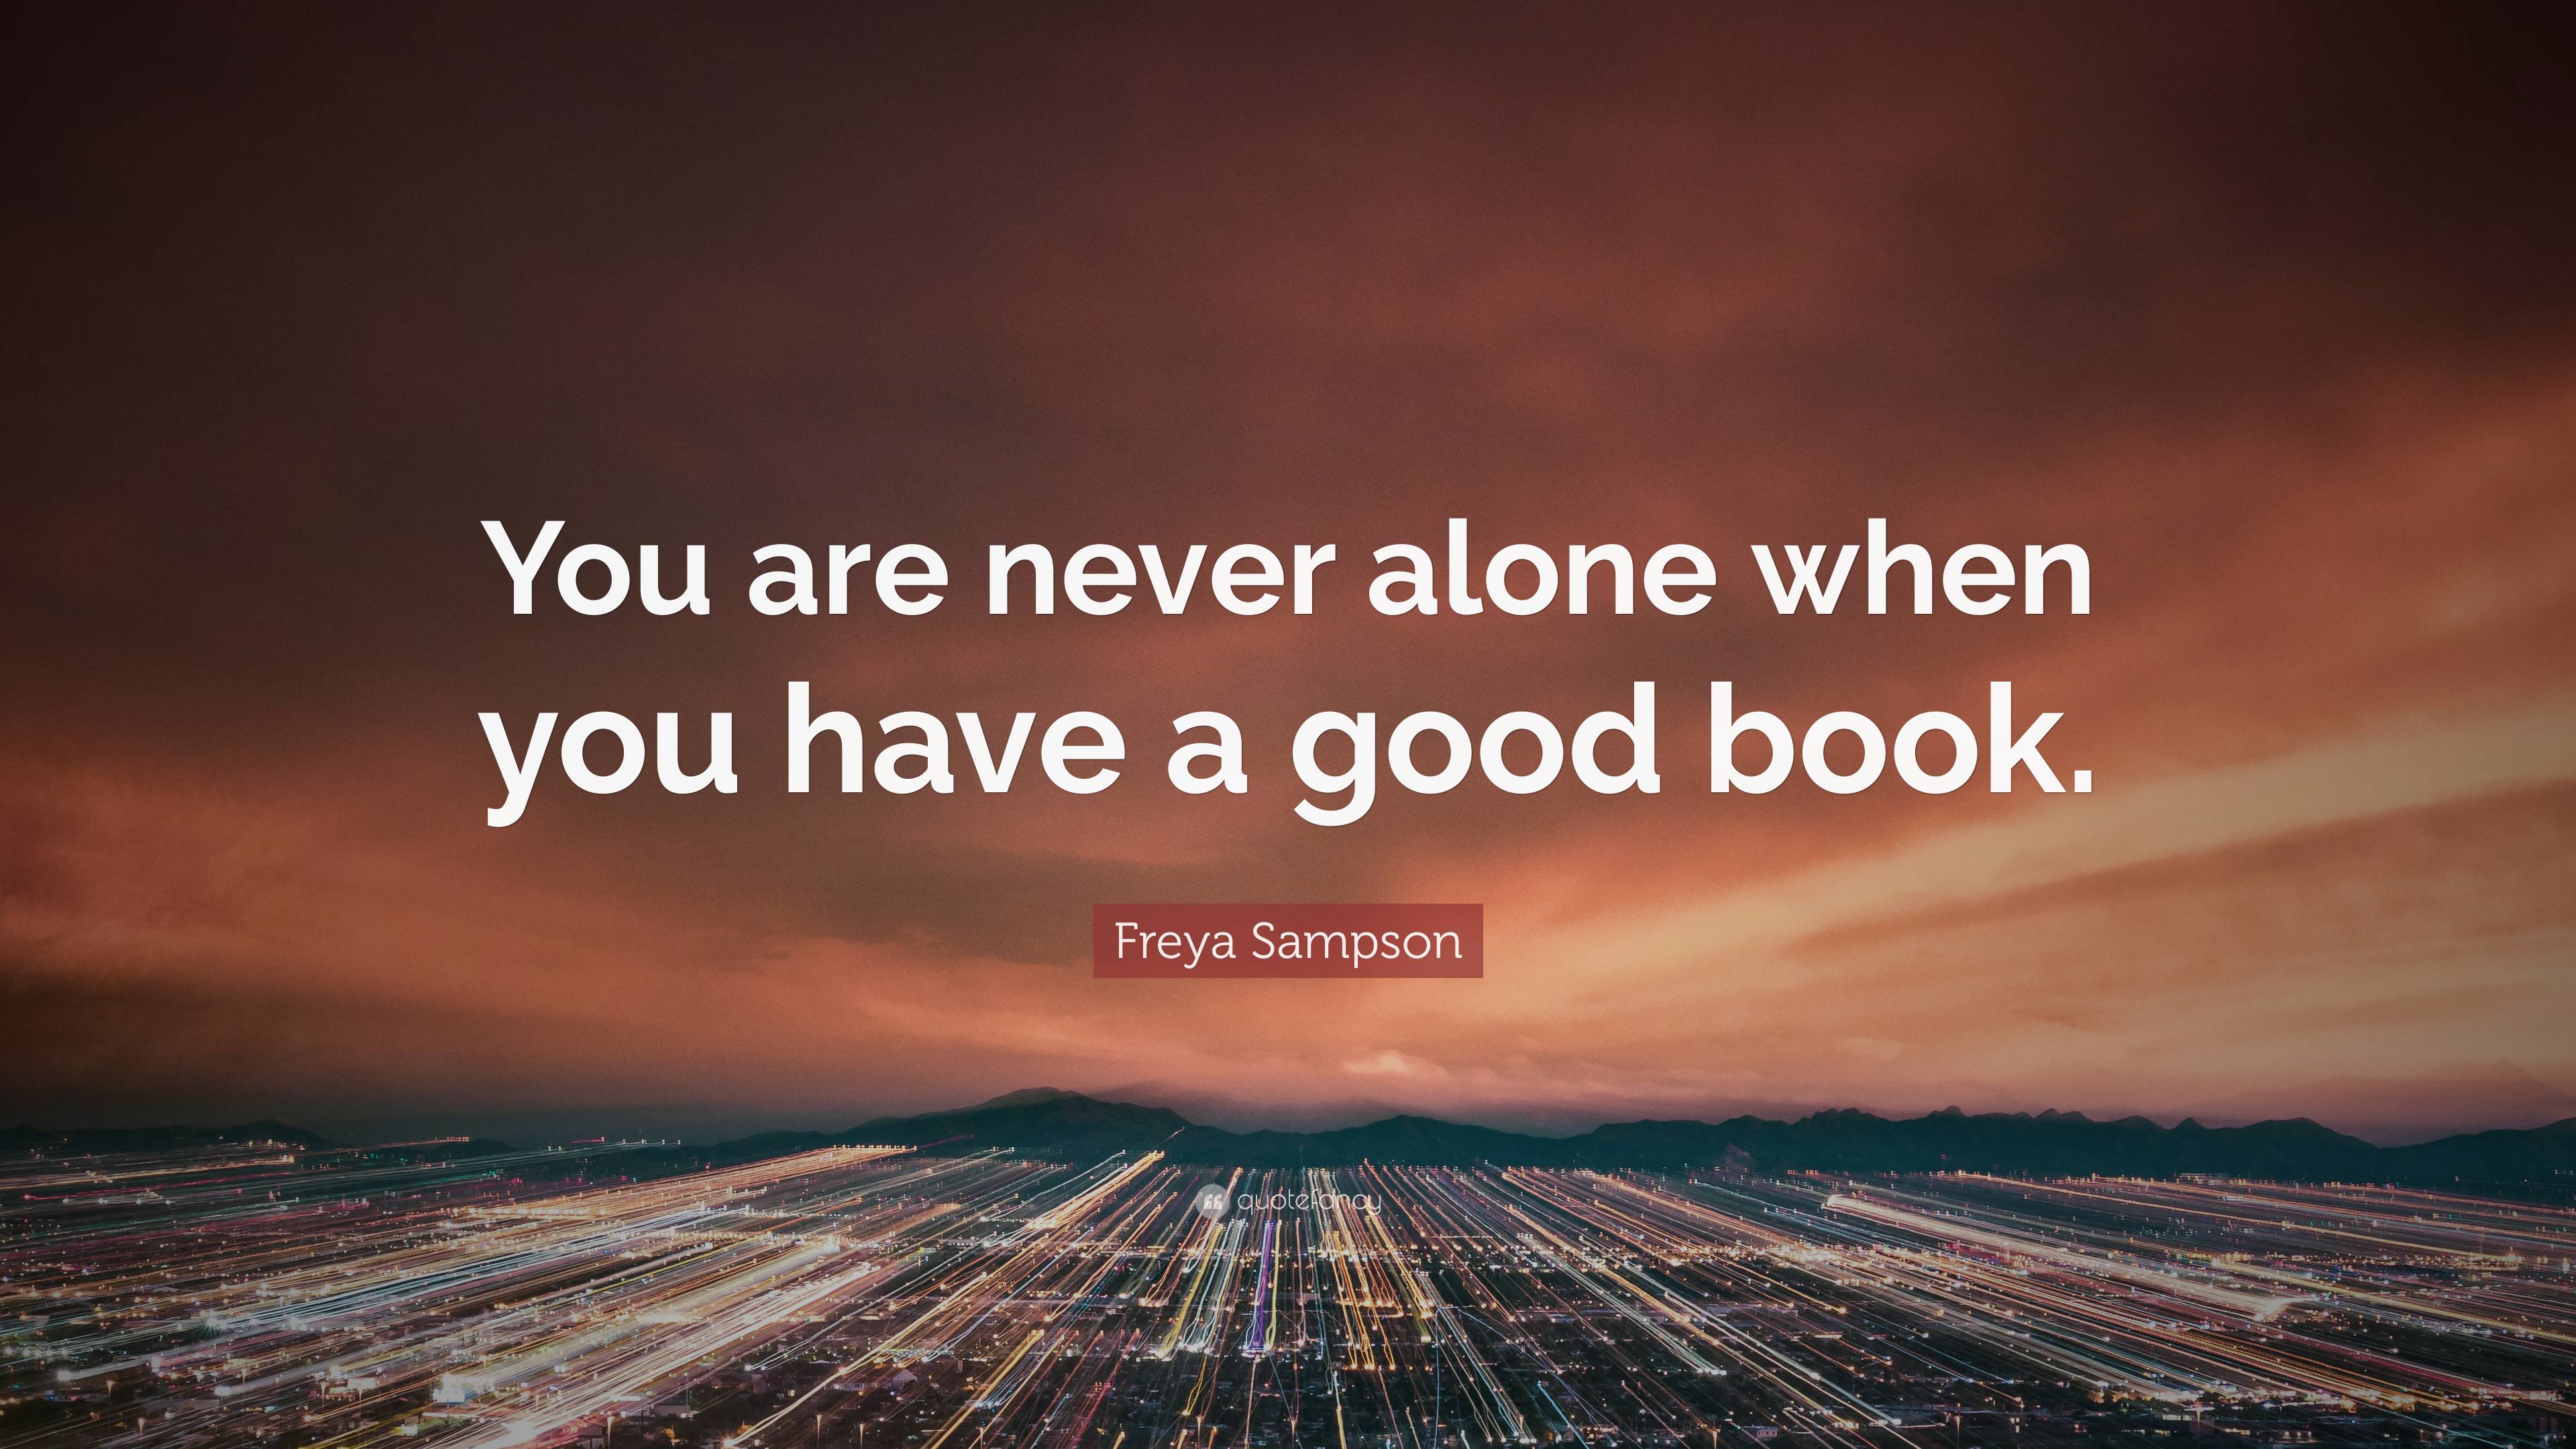 Freya Sampson Quote: “You are never alone when you have a good book.”